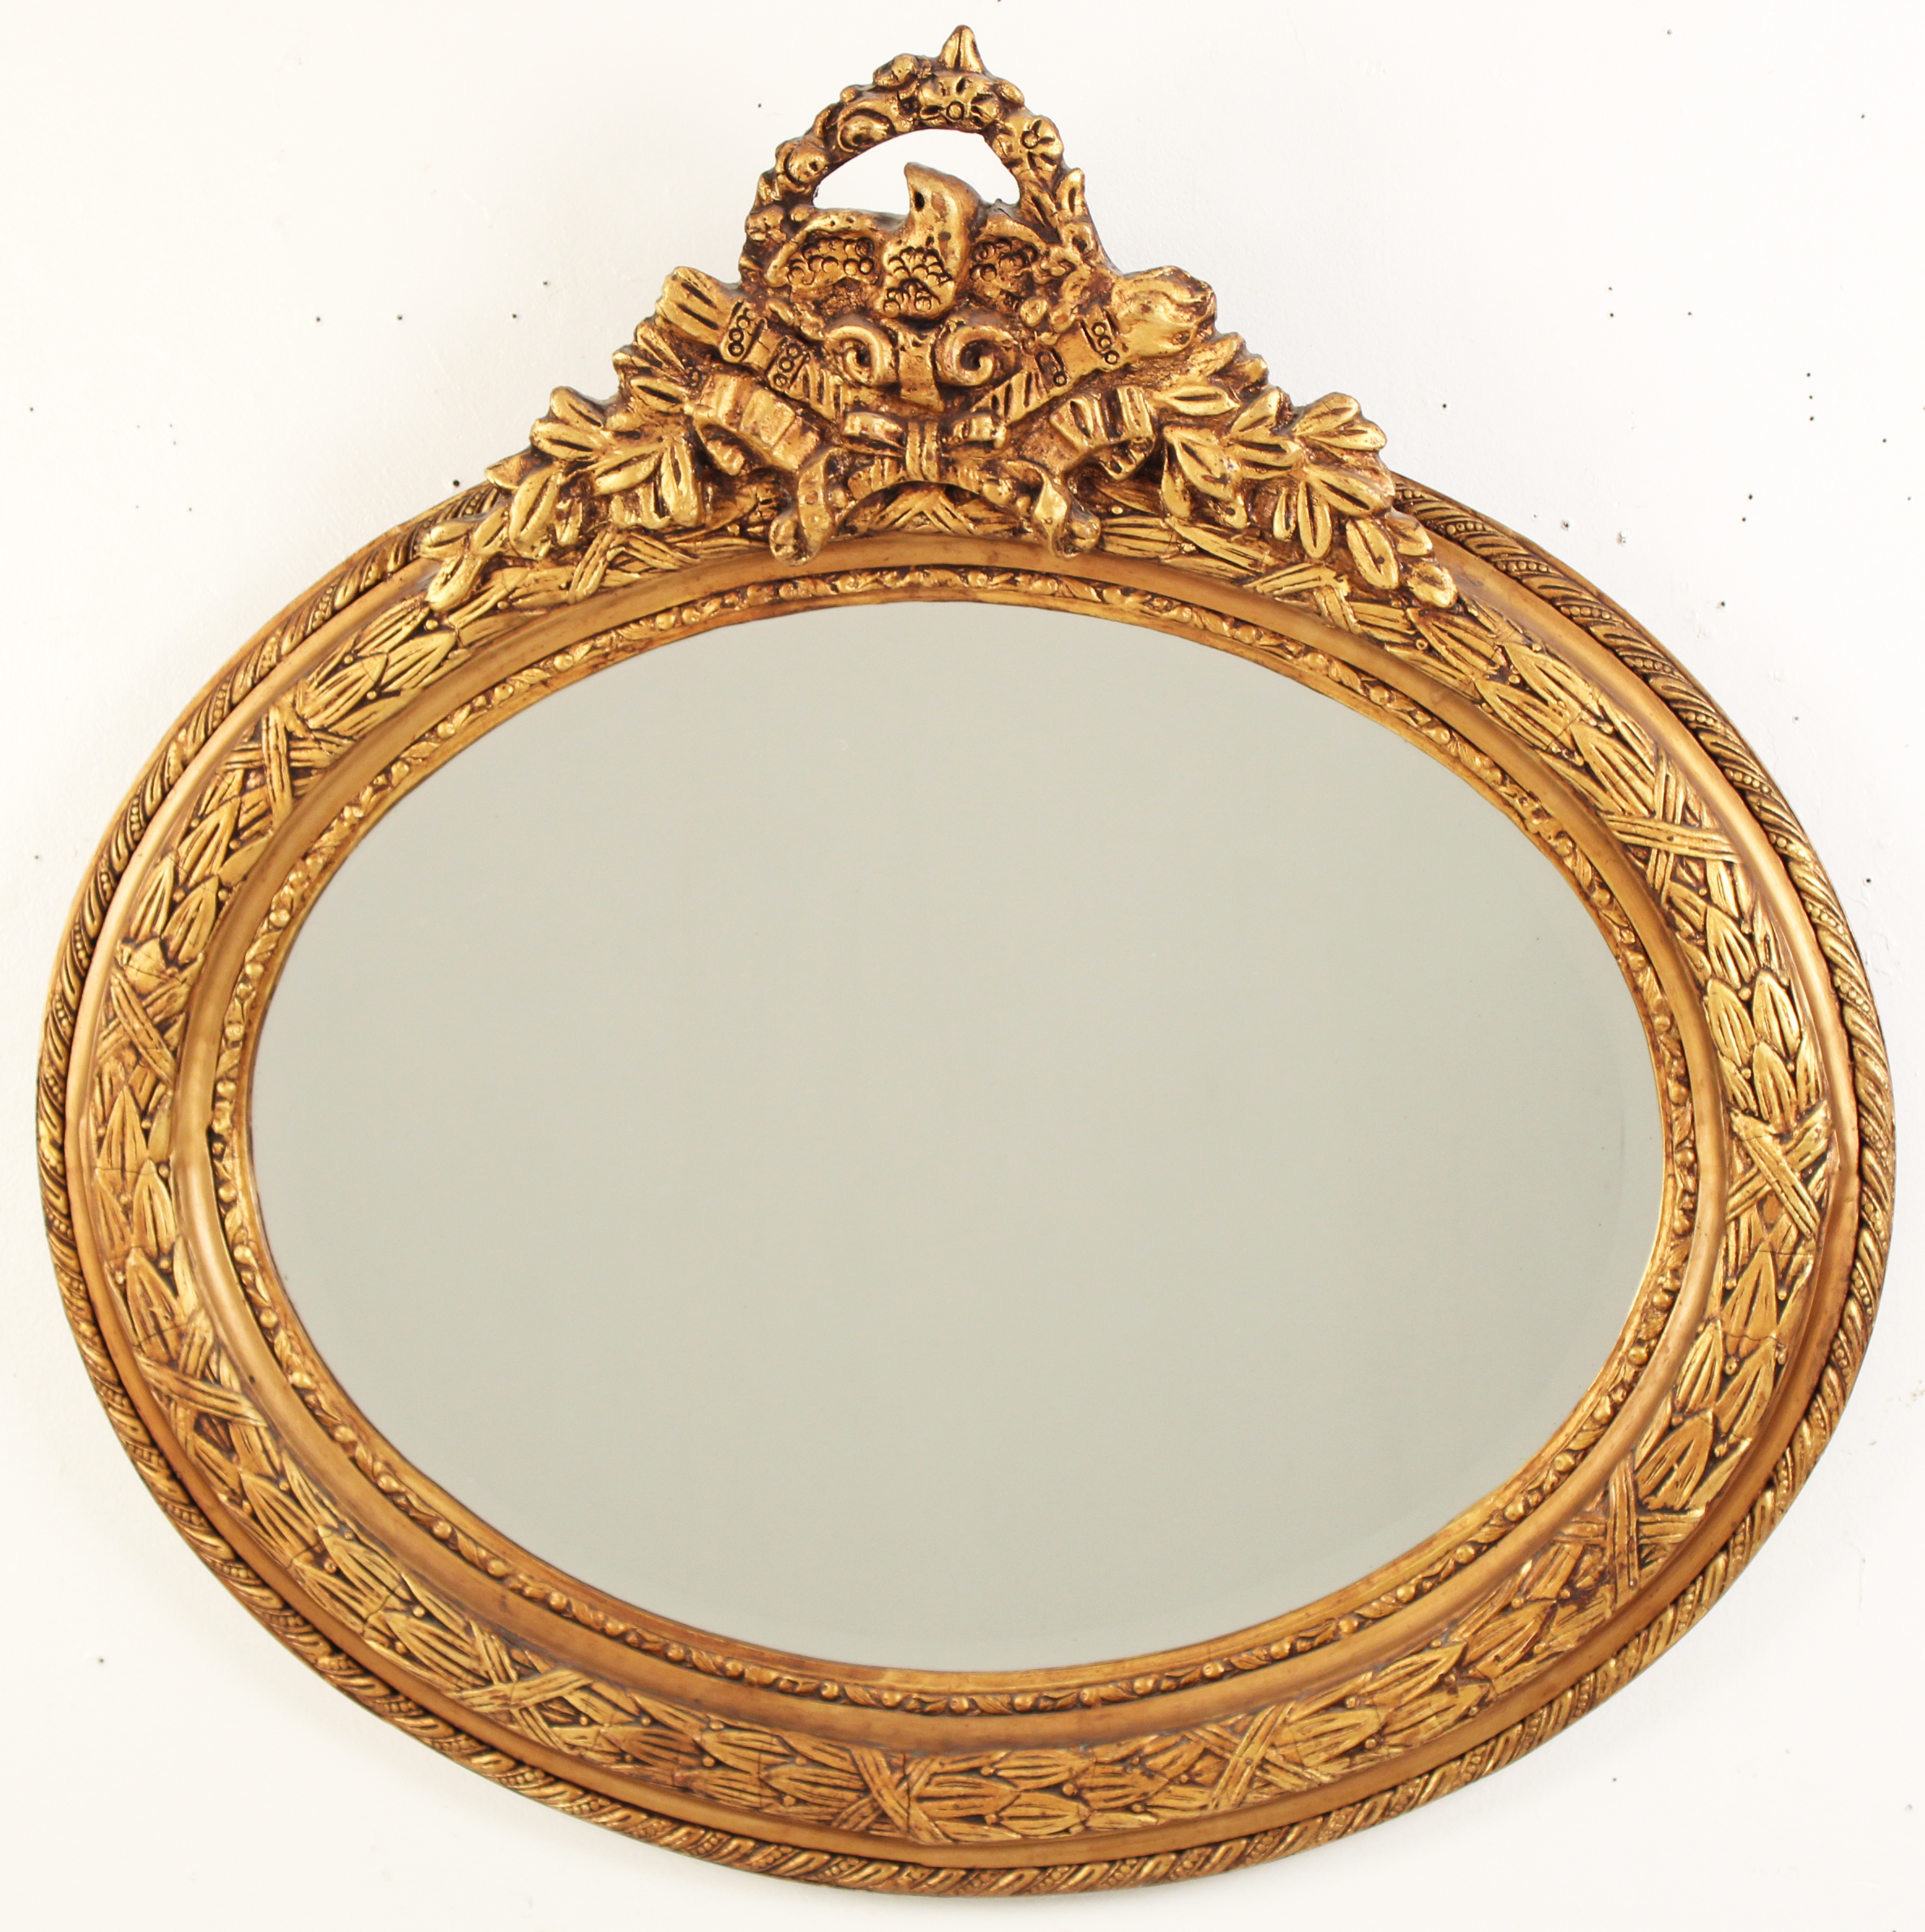 FRENCH STYLE GILTWOOD OVAL MIRROR 2c8952